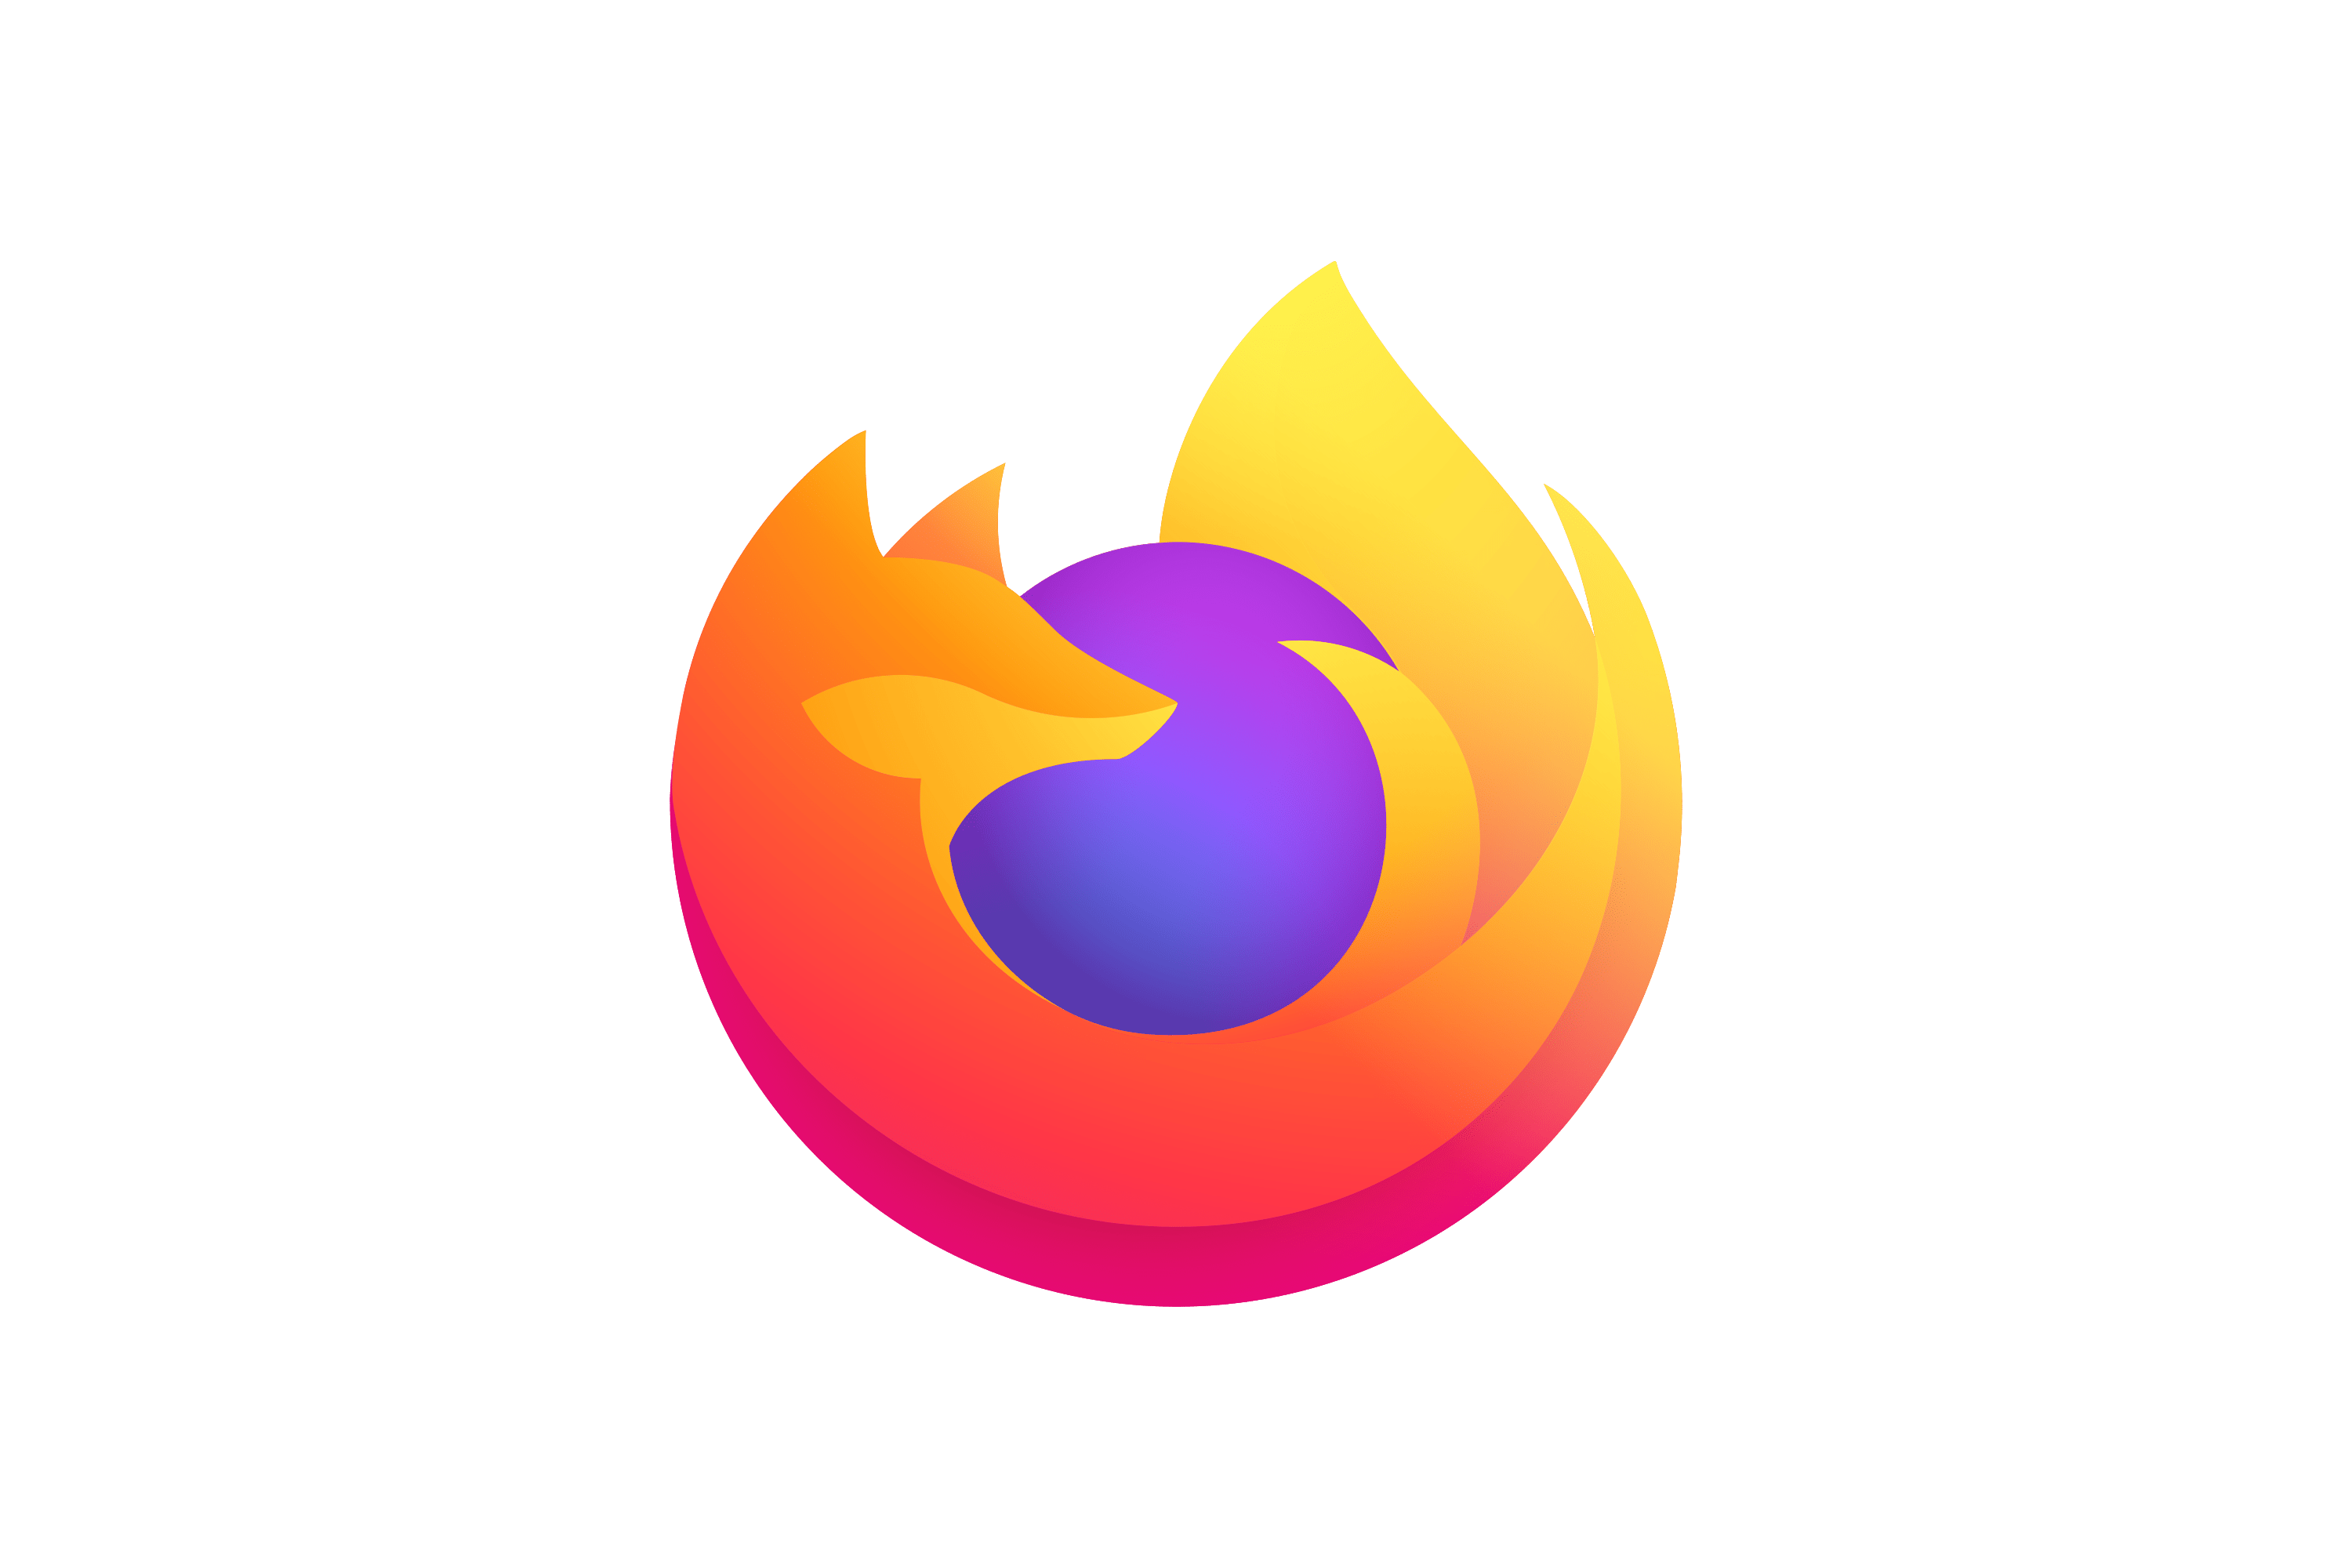 official mozilla firefox free download